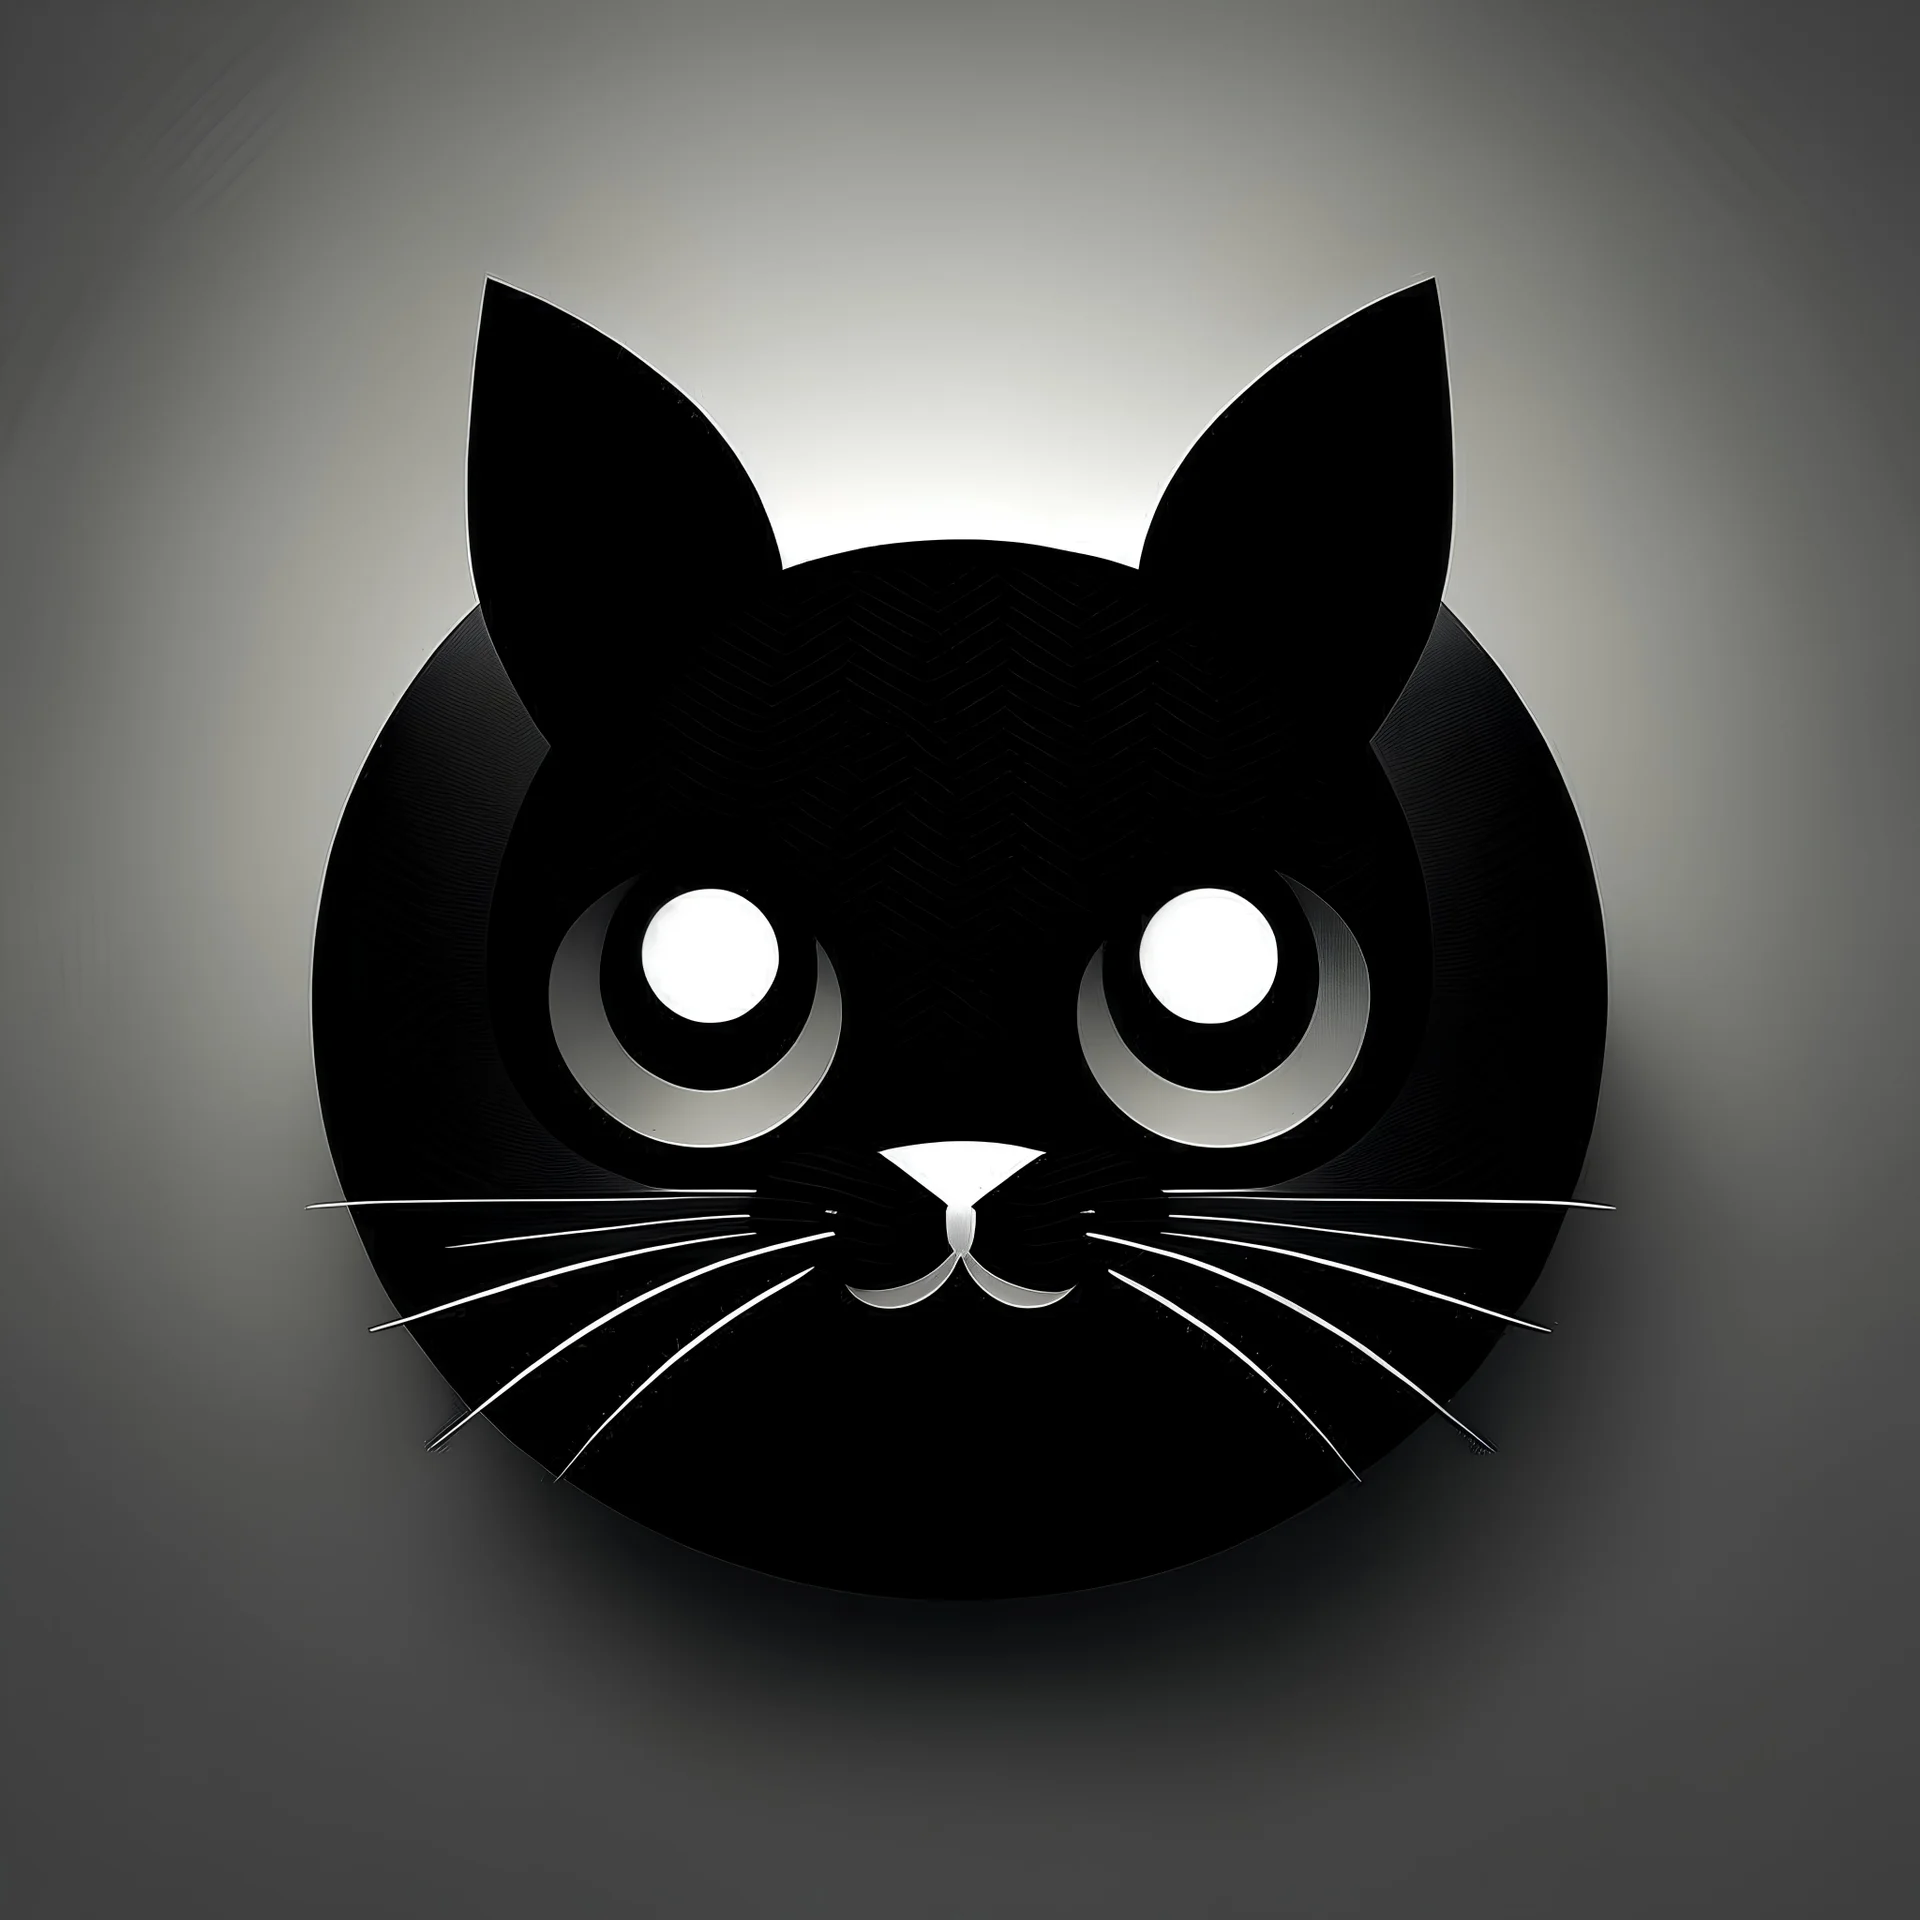 logo design, bunchy, 3d lighting, cat, highly detailed face, cut off, symmetrical, friendly, minimal, round, simple, cute , only black